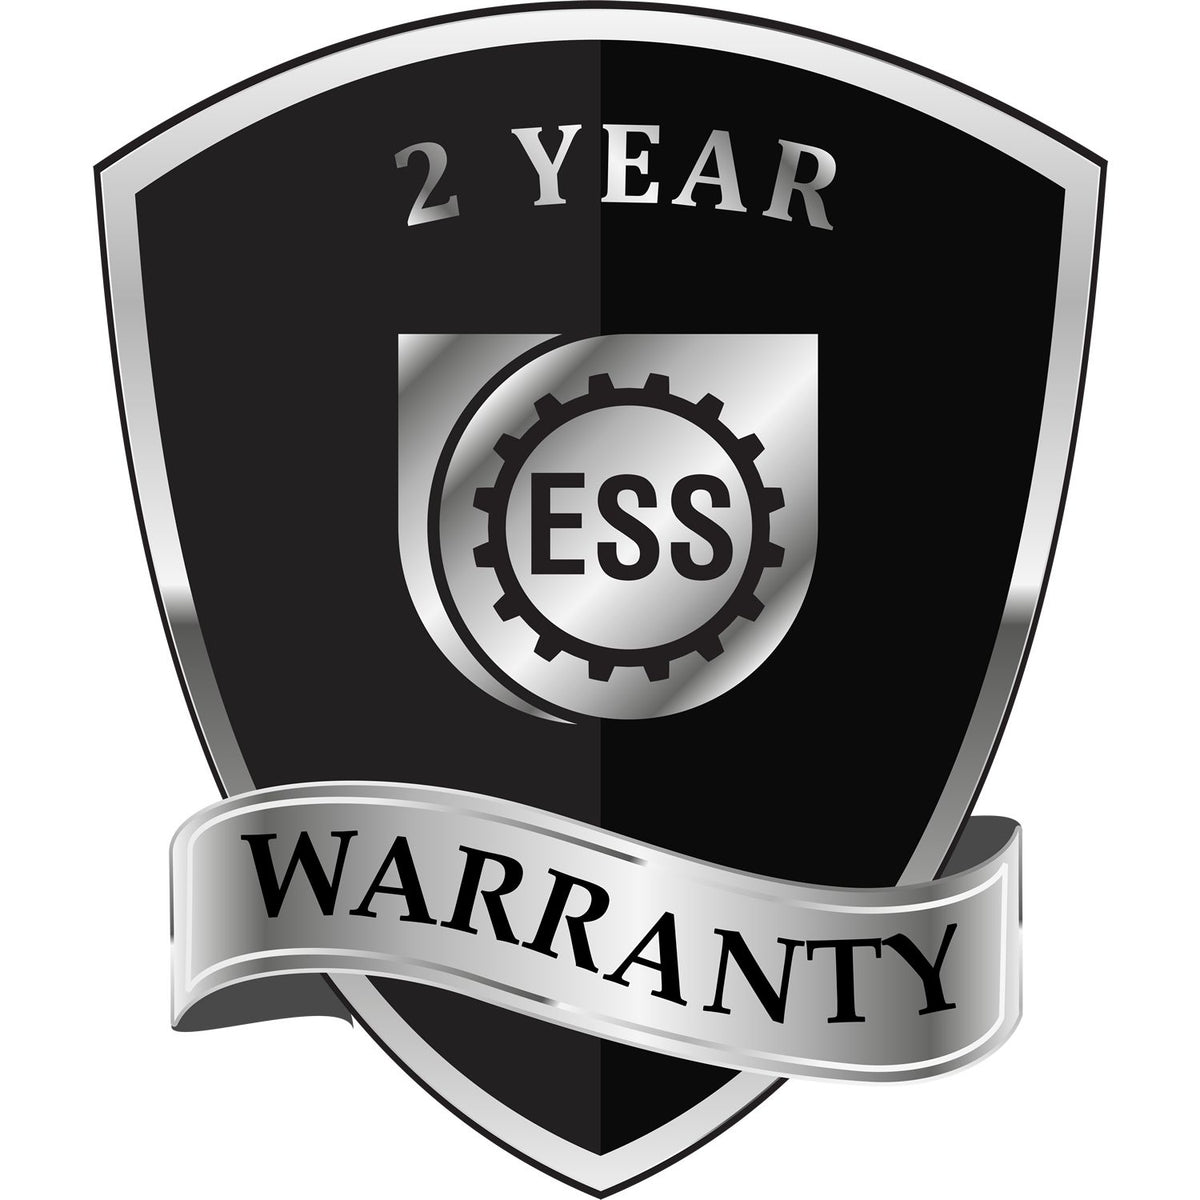 A black and silver badge or emblem showing warranty information for the Gift Minnesota Architect Seal